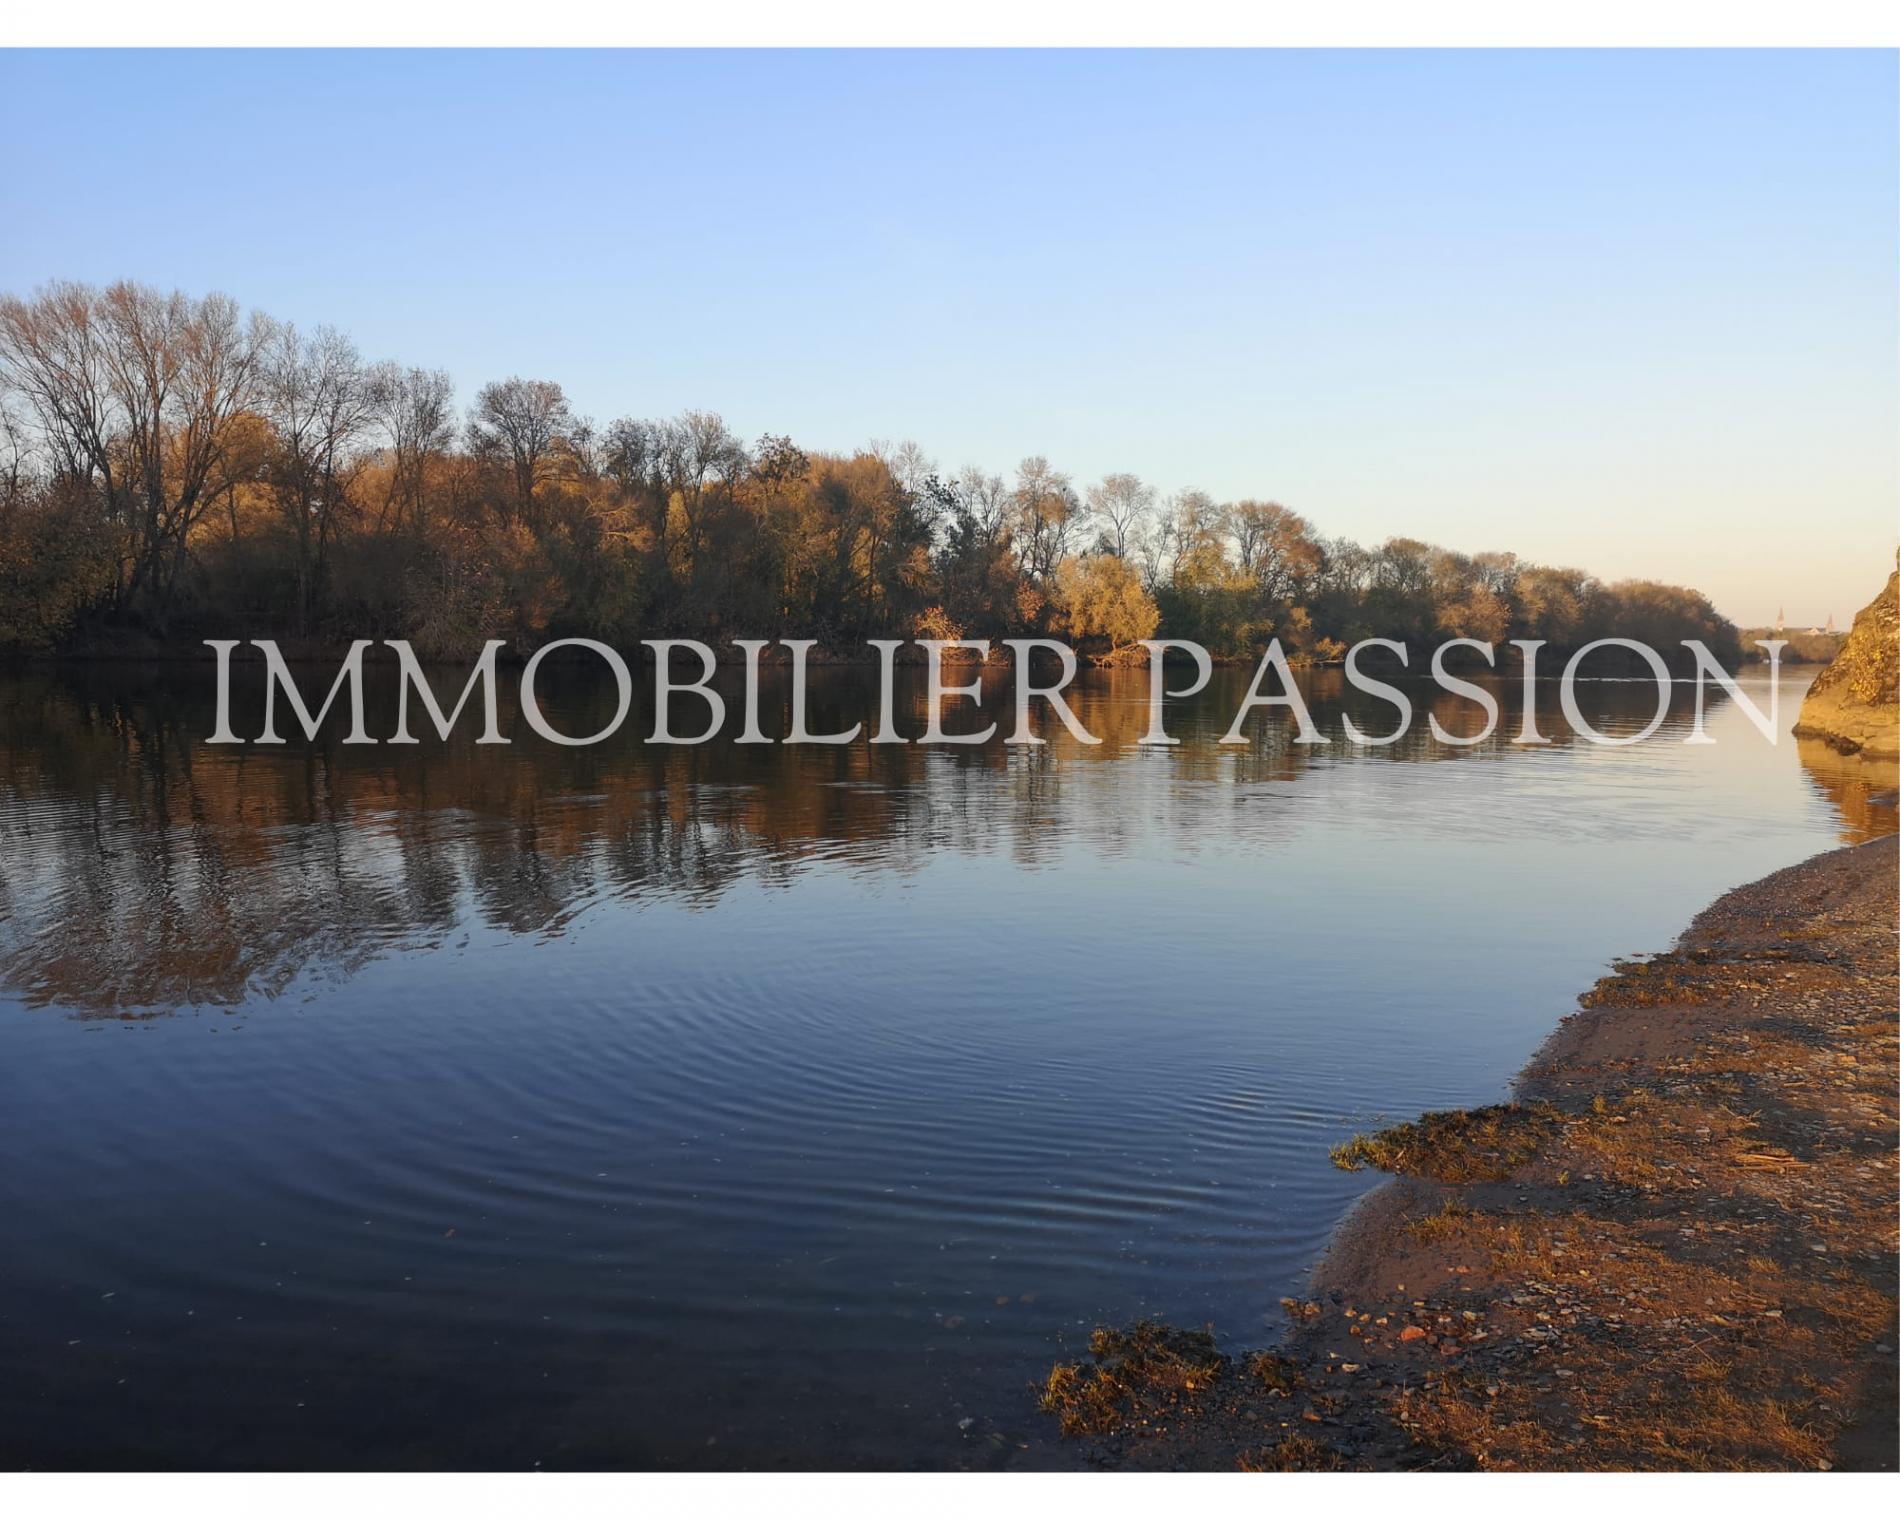 IMMOBILIER PASSION